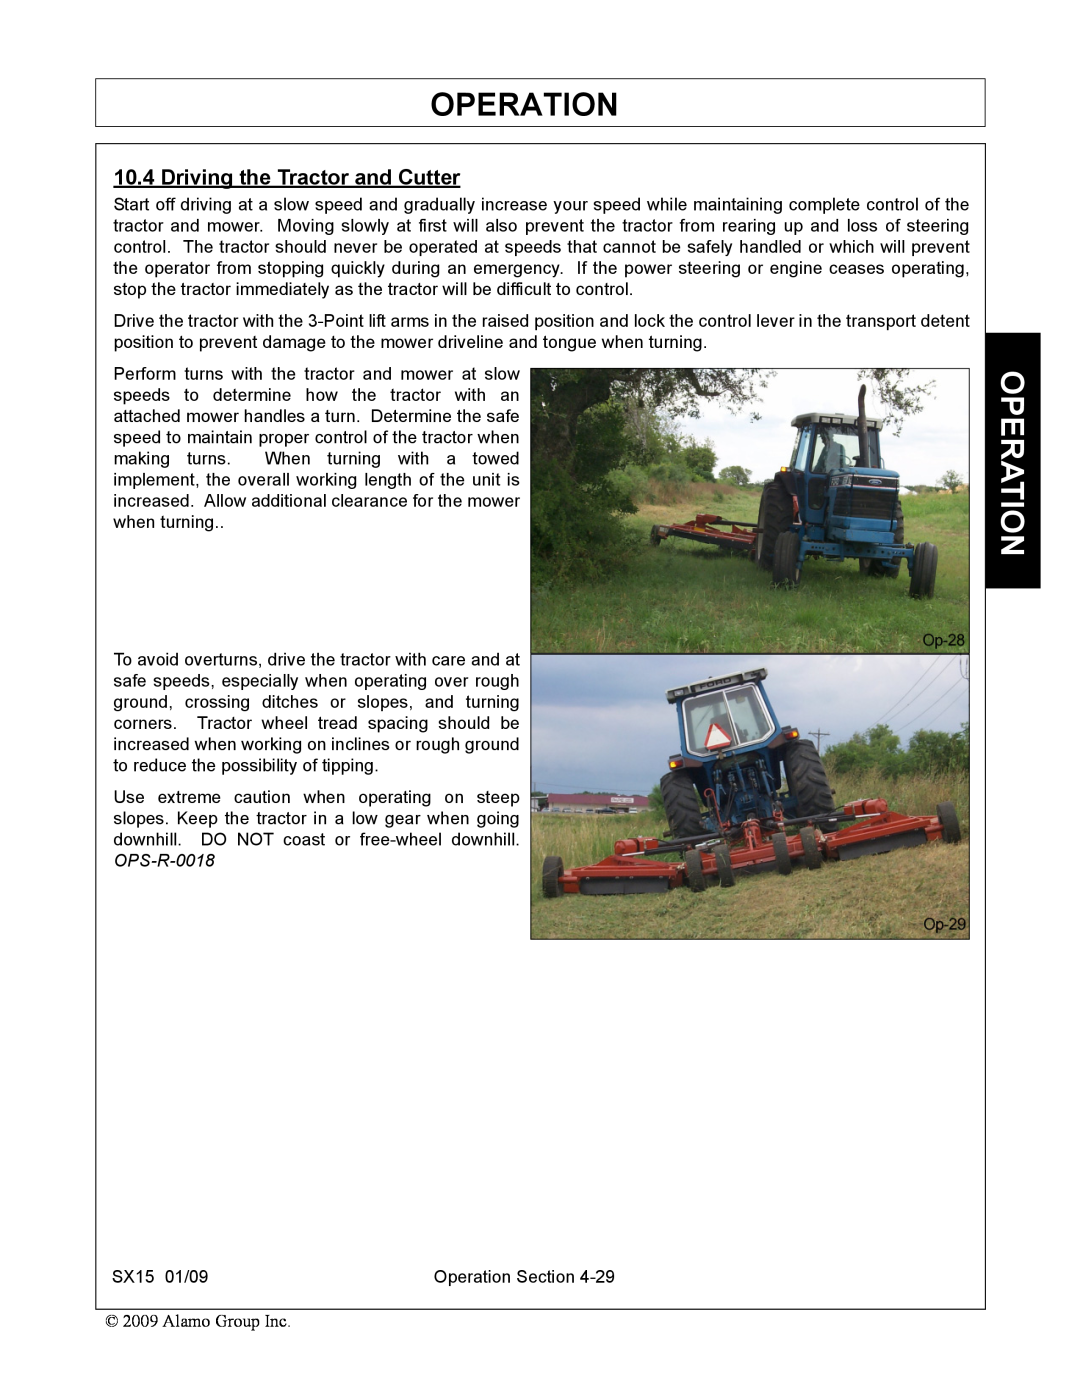 Alamo SX15 manual Driving the Tractor and Cutter, Operation 